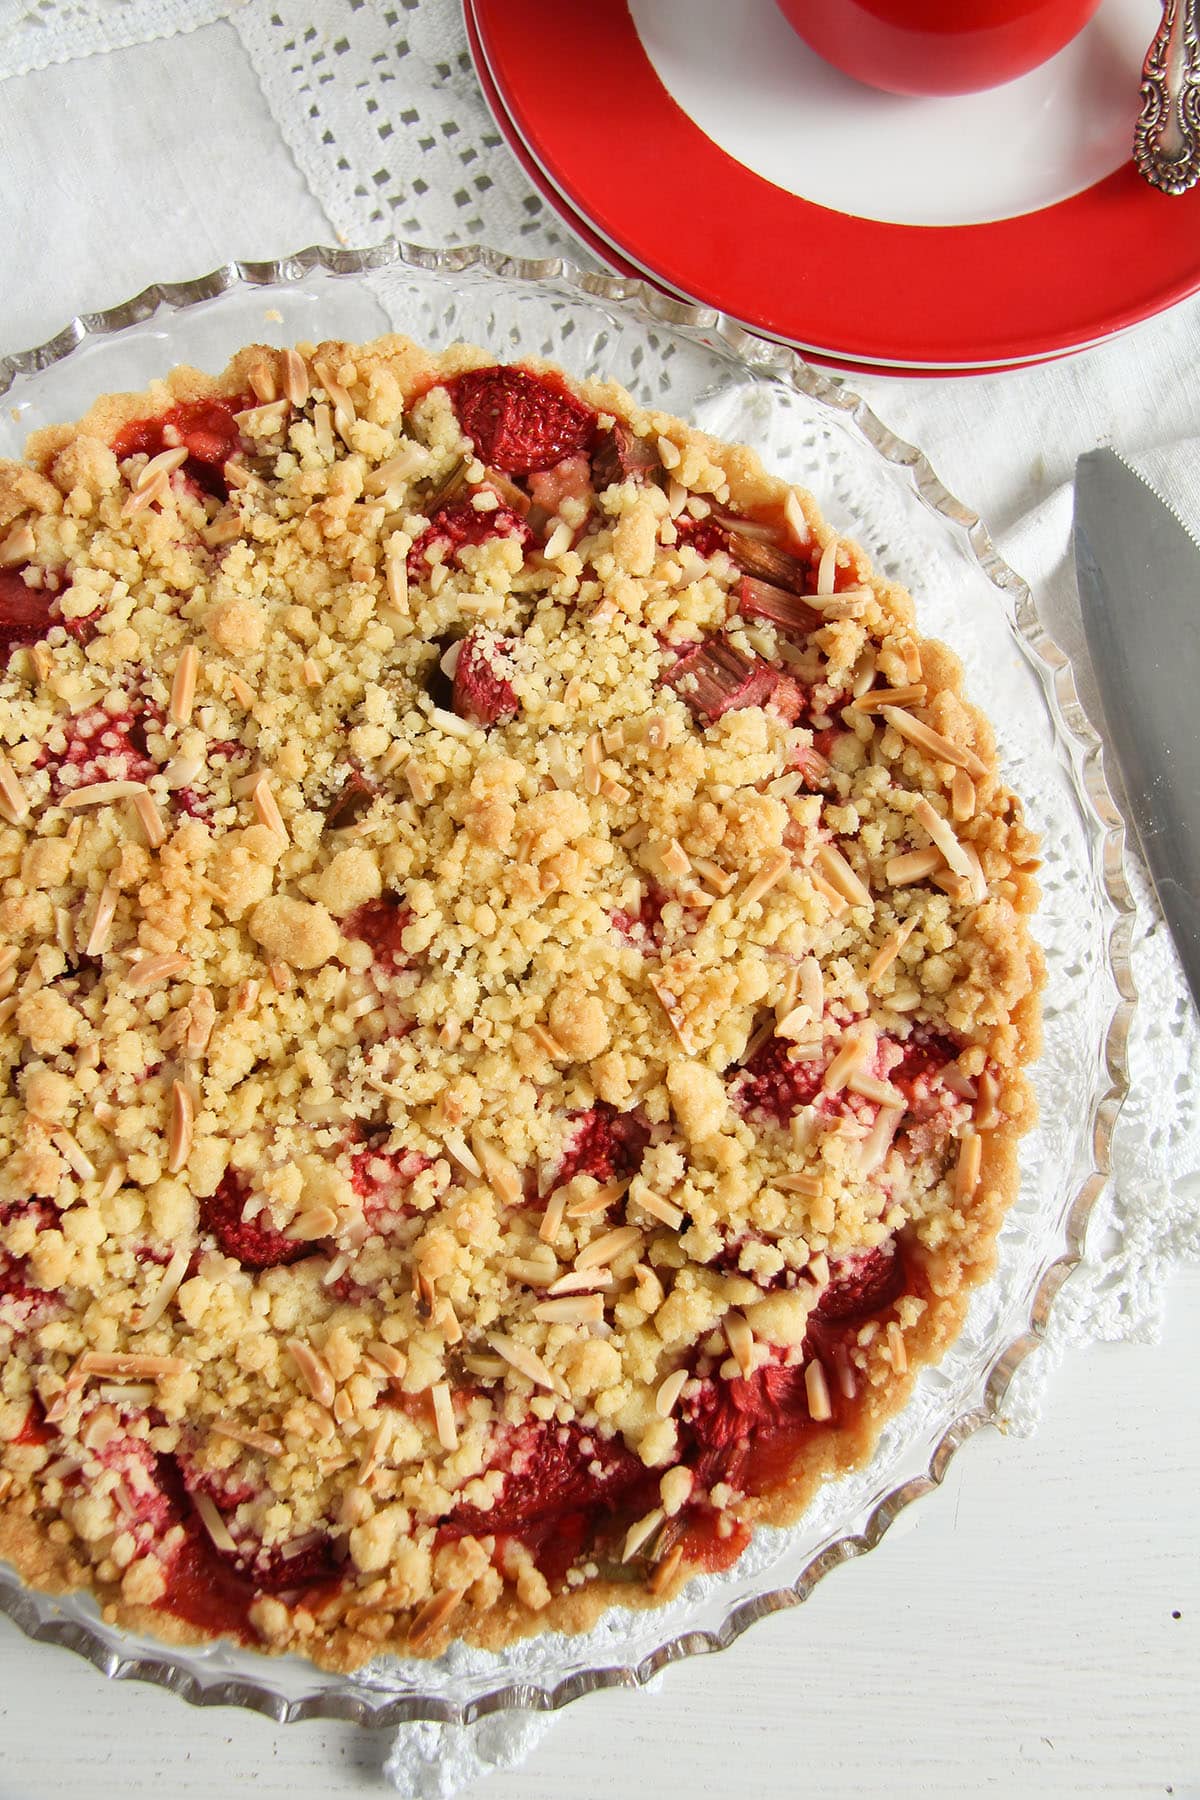 strawberry and rhubarb tart with crumbles on top on a glass platter.